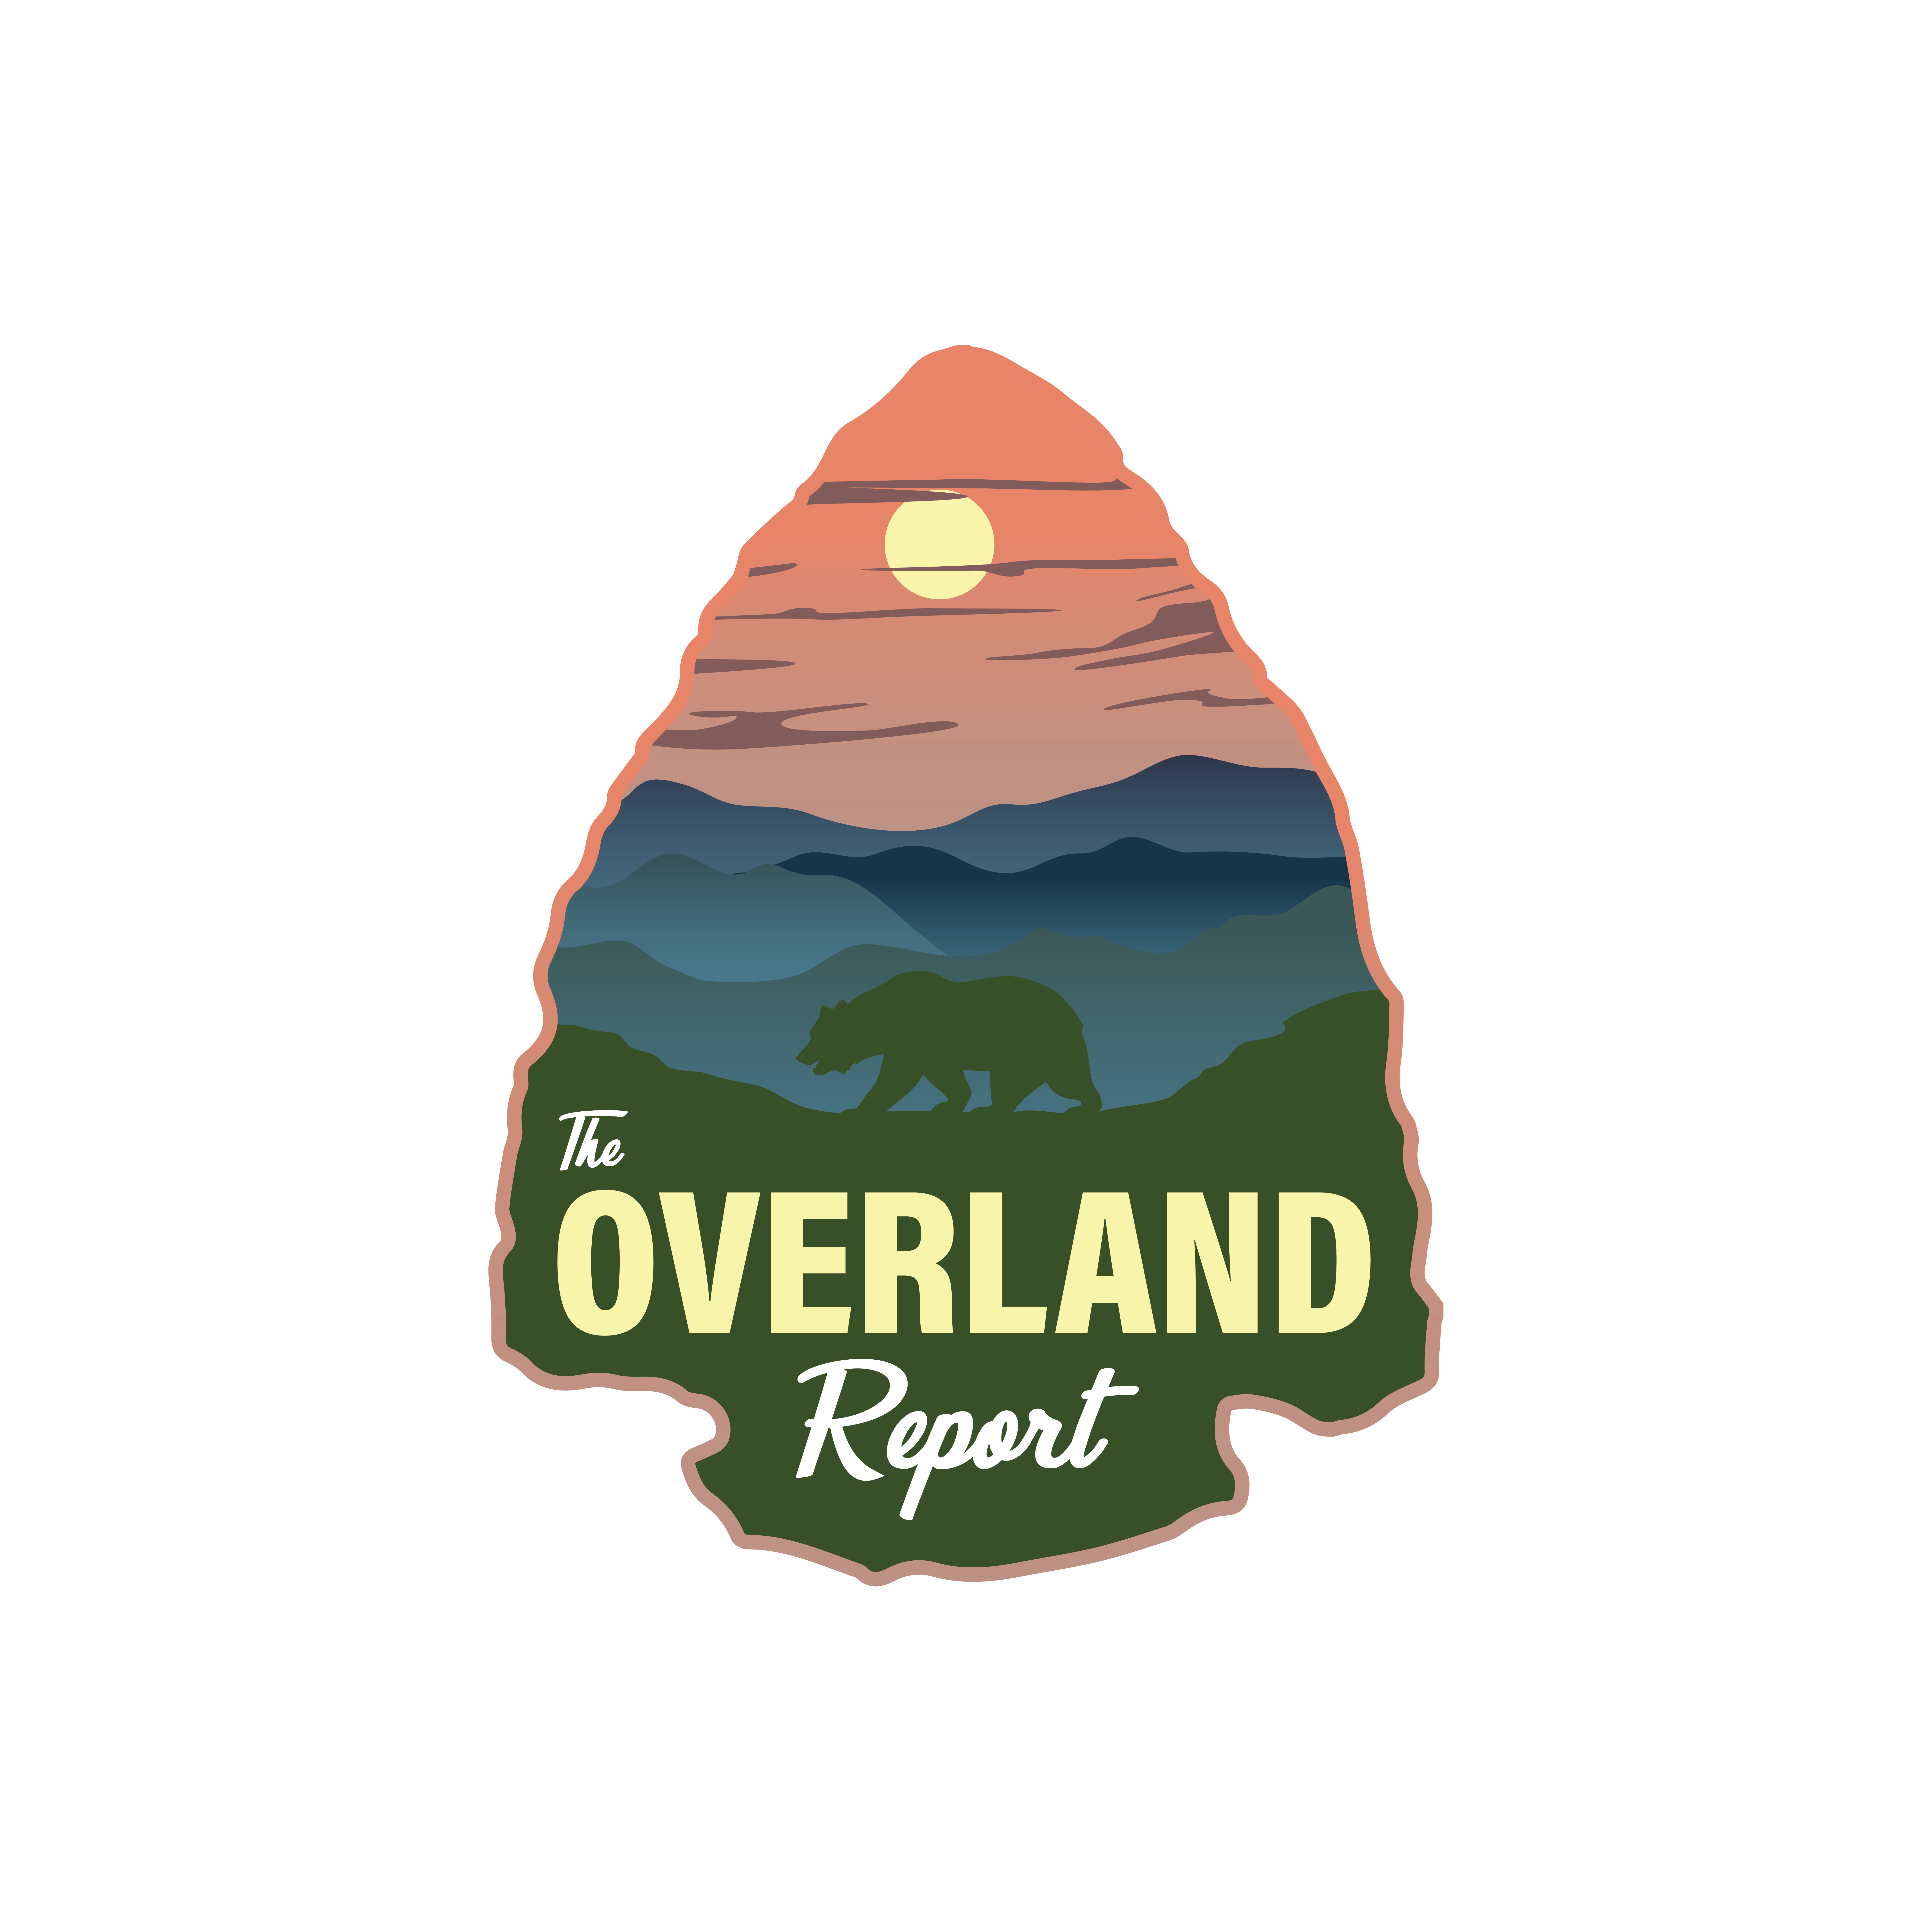 The Overland Report